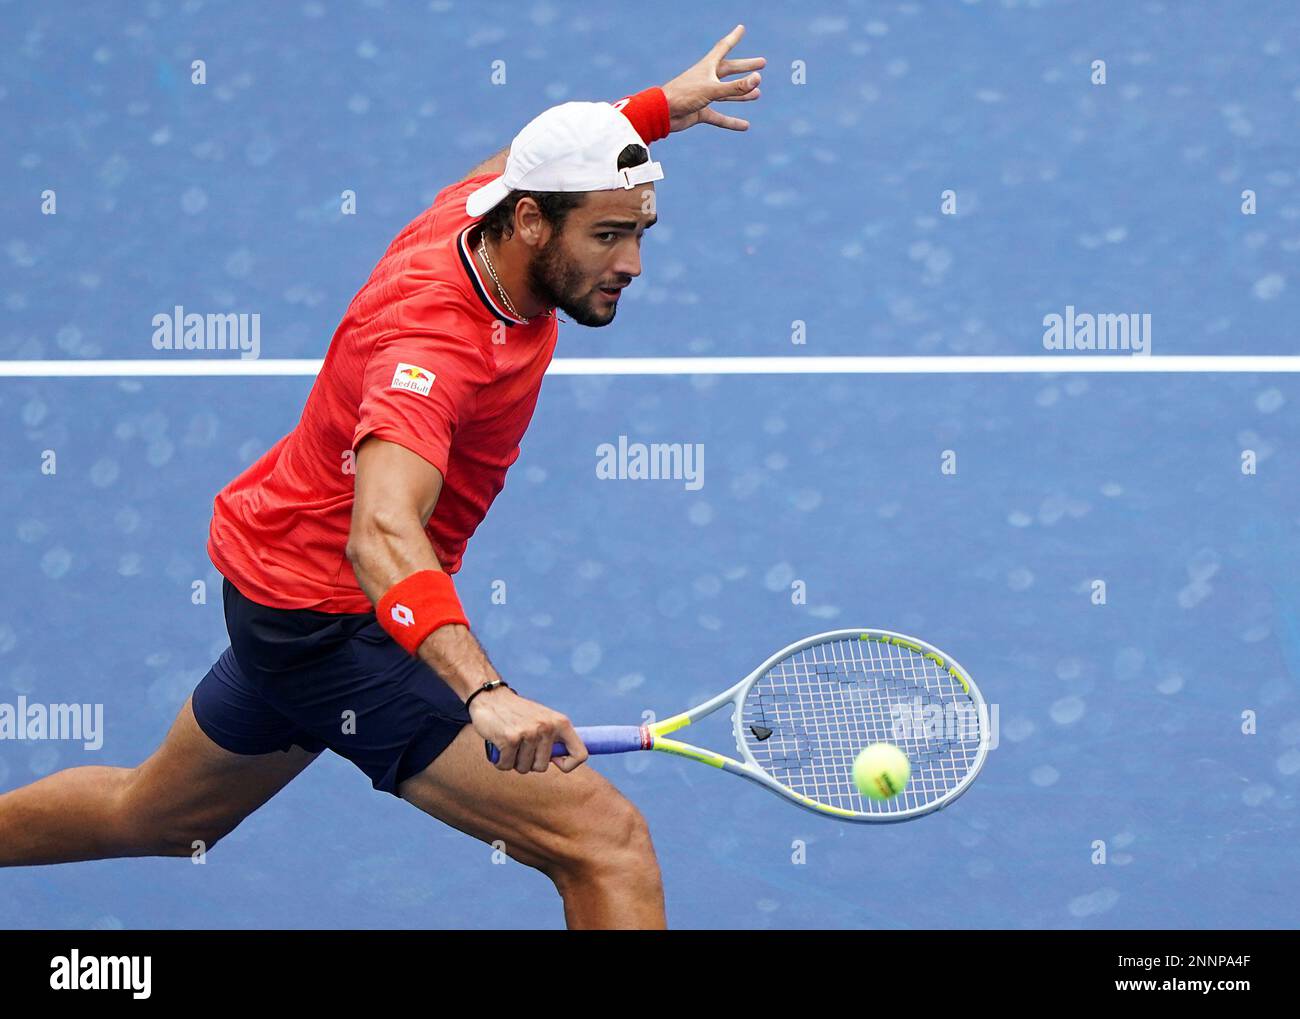 Matteo Berrettini in action against Andrey Rublev during a mens singles match at the 2020 US Open, Monday, Sept